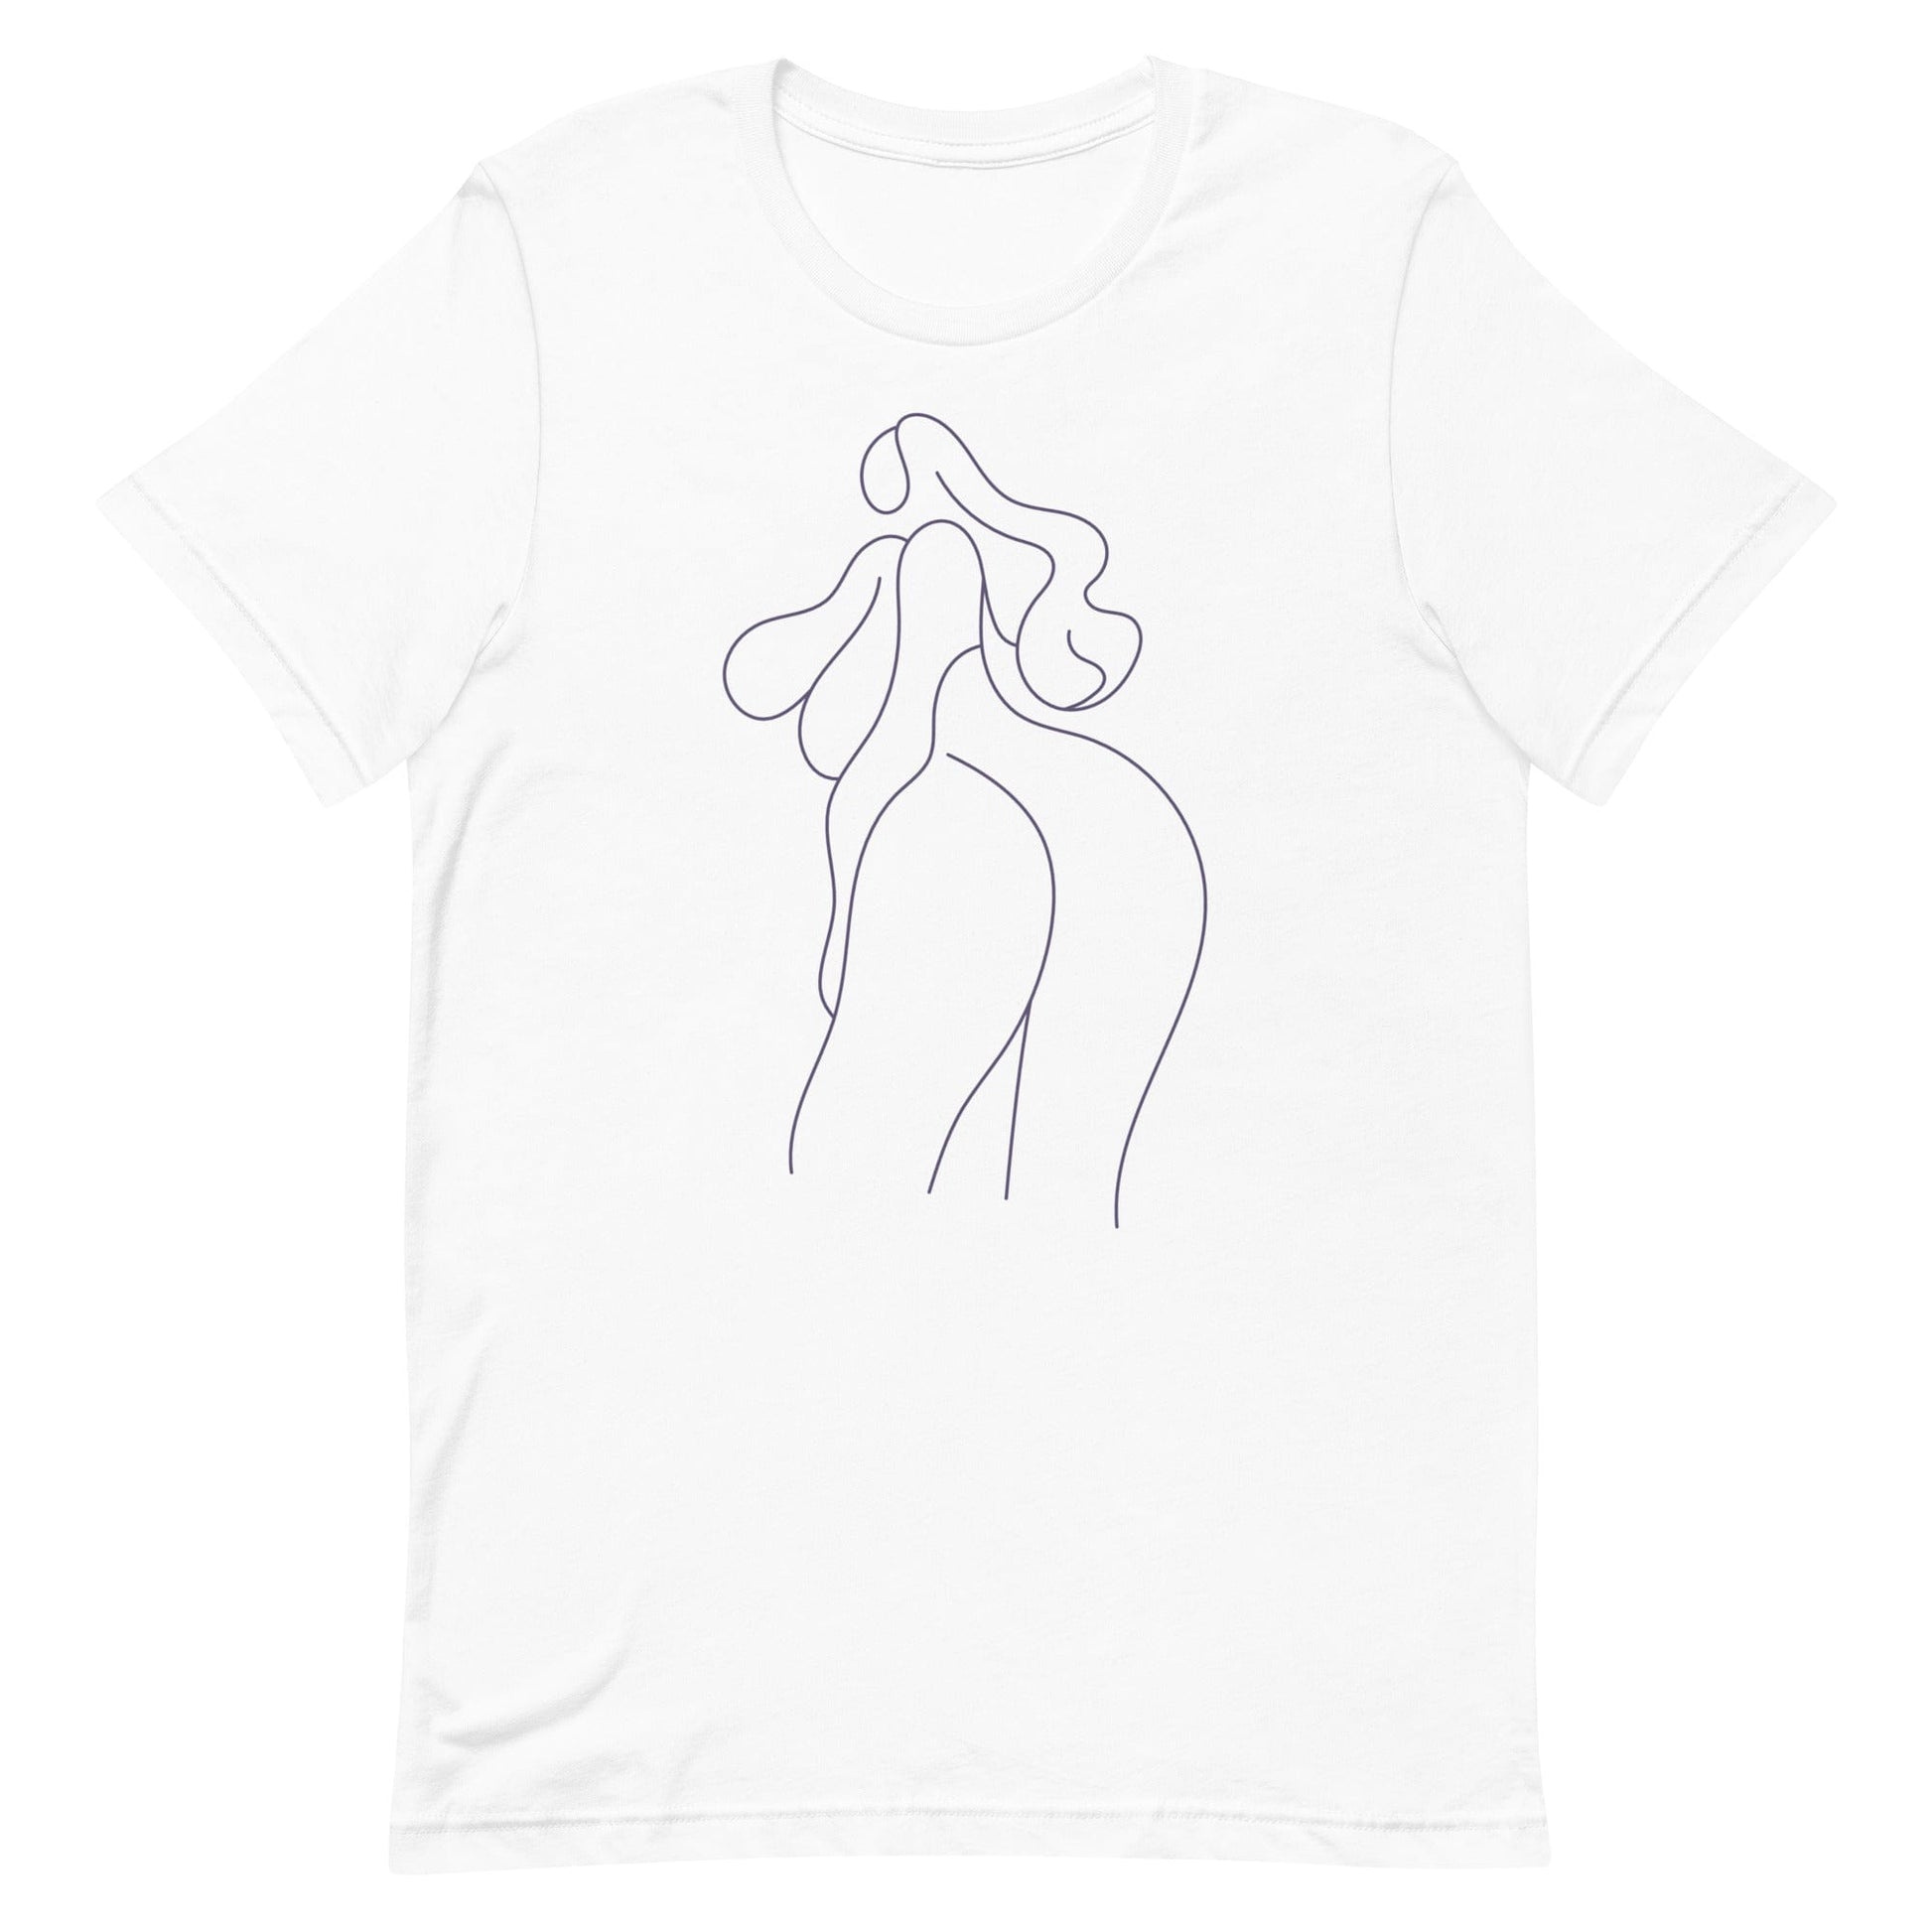 drawing-female-body-tshirt-apparel-at-feminist-define-white-front